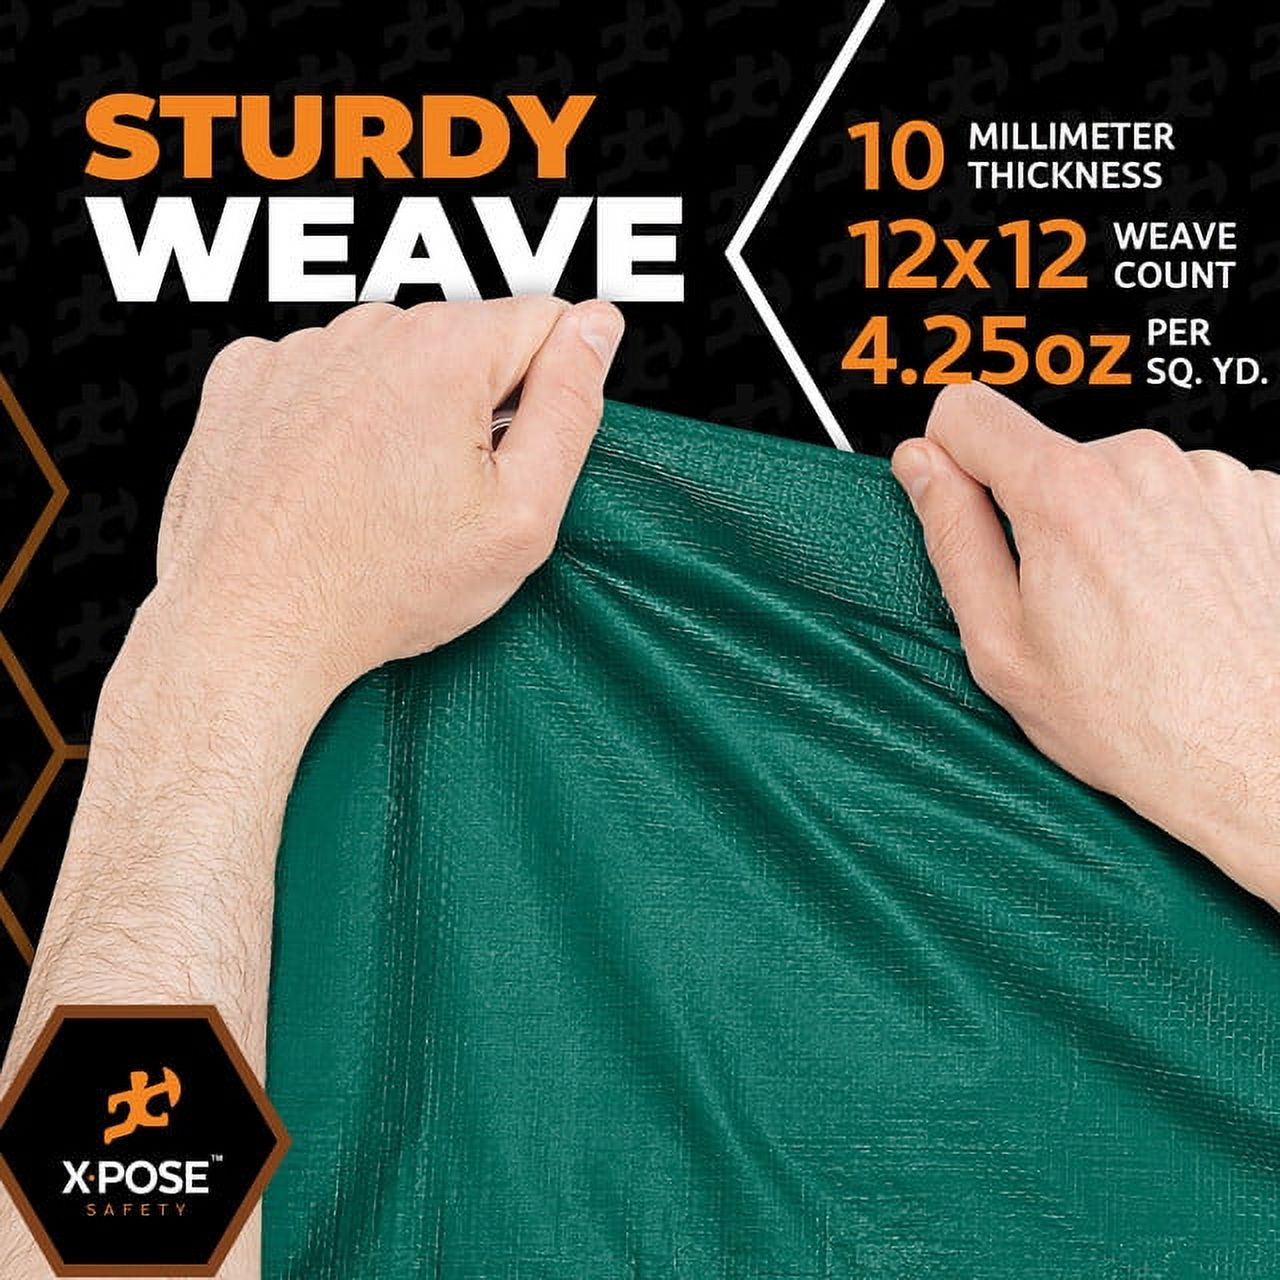 Heavy Duty Poly Tarp 9 Feet x 12 Feet 10 Mil Thick Waterproof, UV Blocking Protective Cover - Reversible Green and Black - Laminated Coating - Rustproof Grommets - by Xpose Safety - image 5 of 8